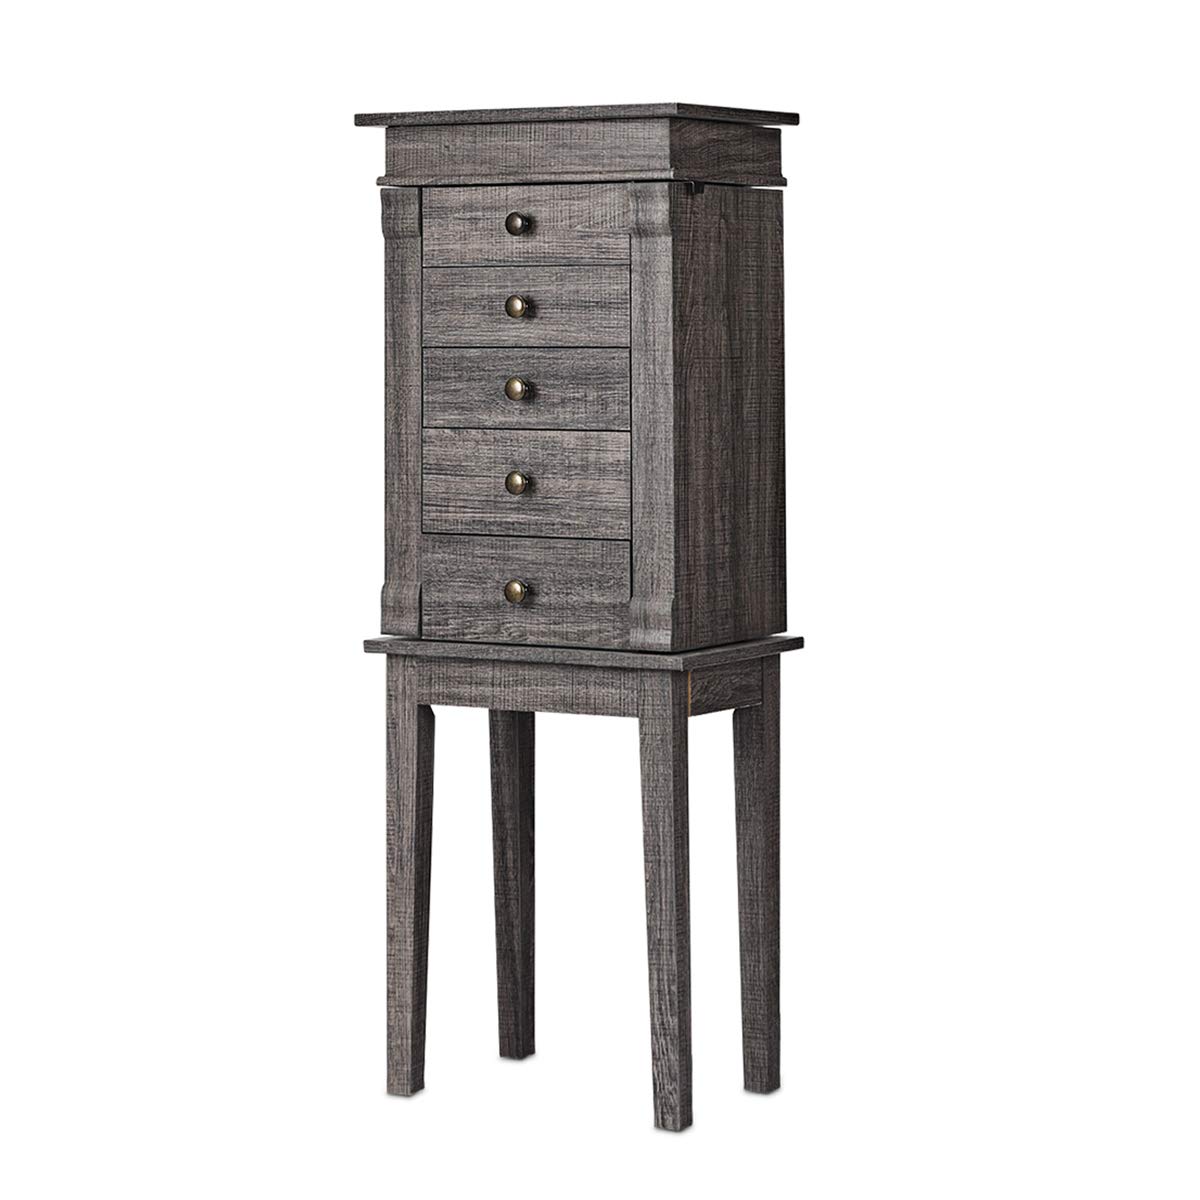 CHARMAID Jewelry Cabinet Armoire with 5 Drawers